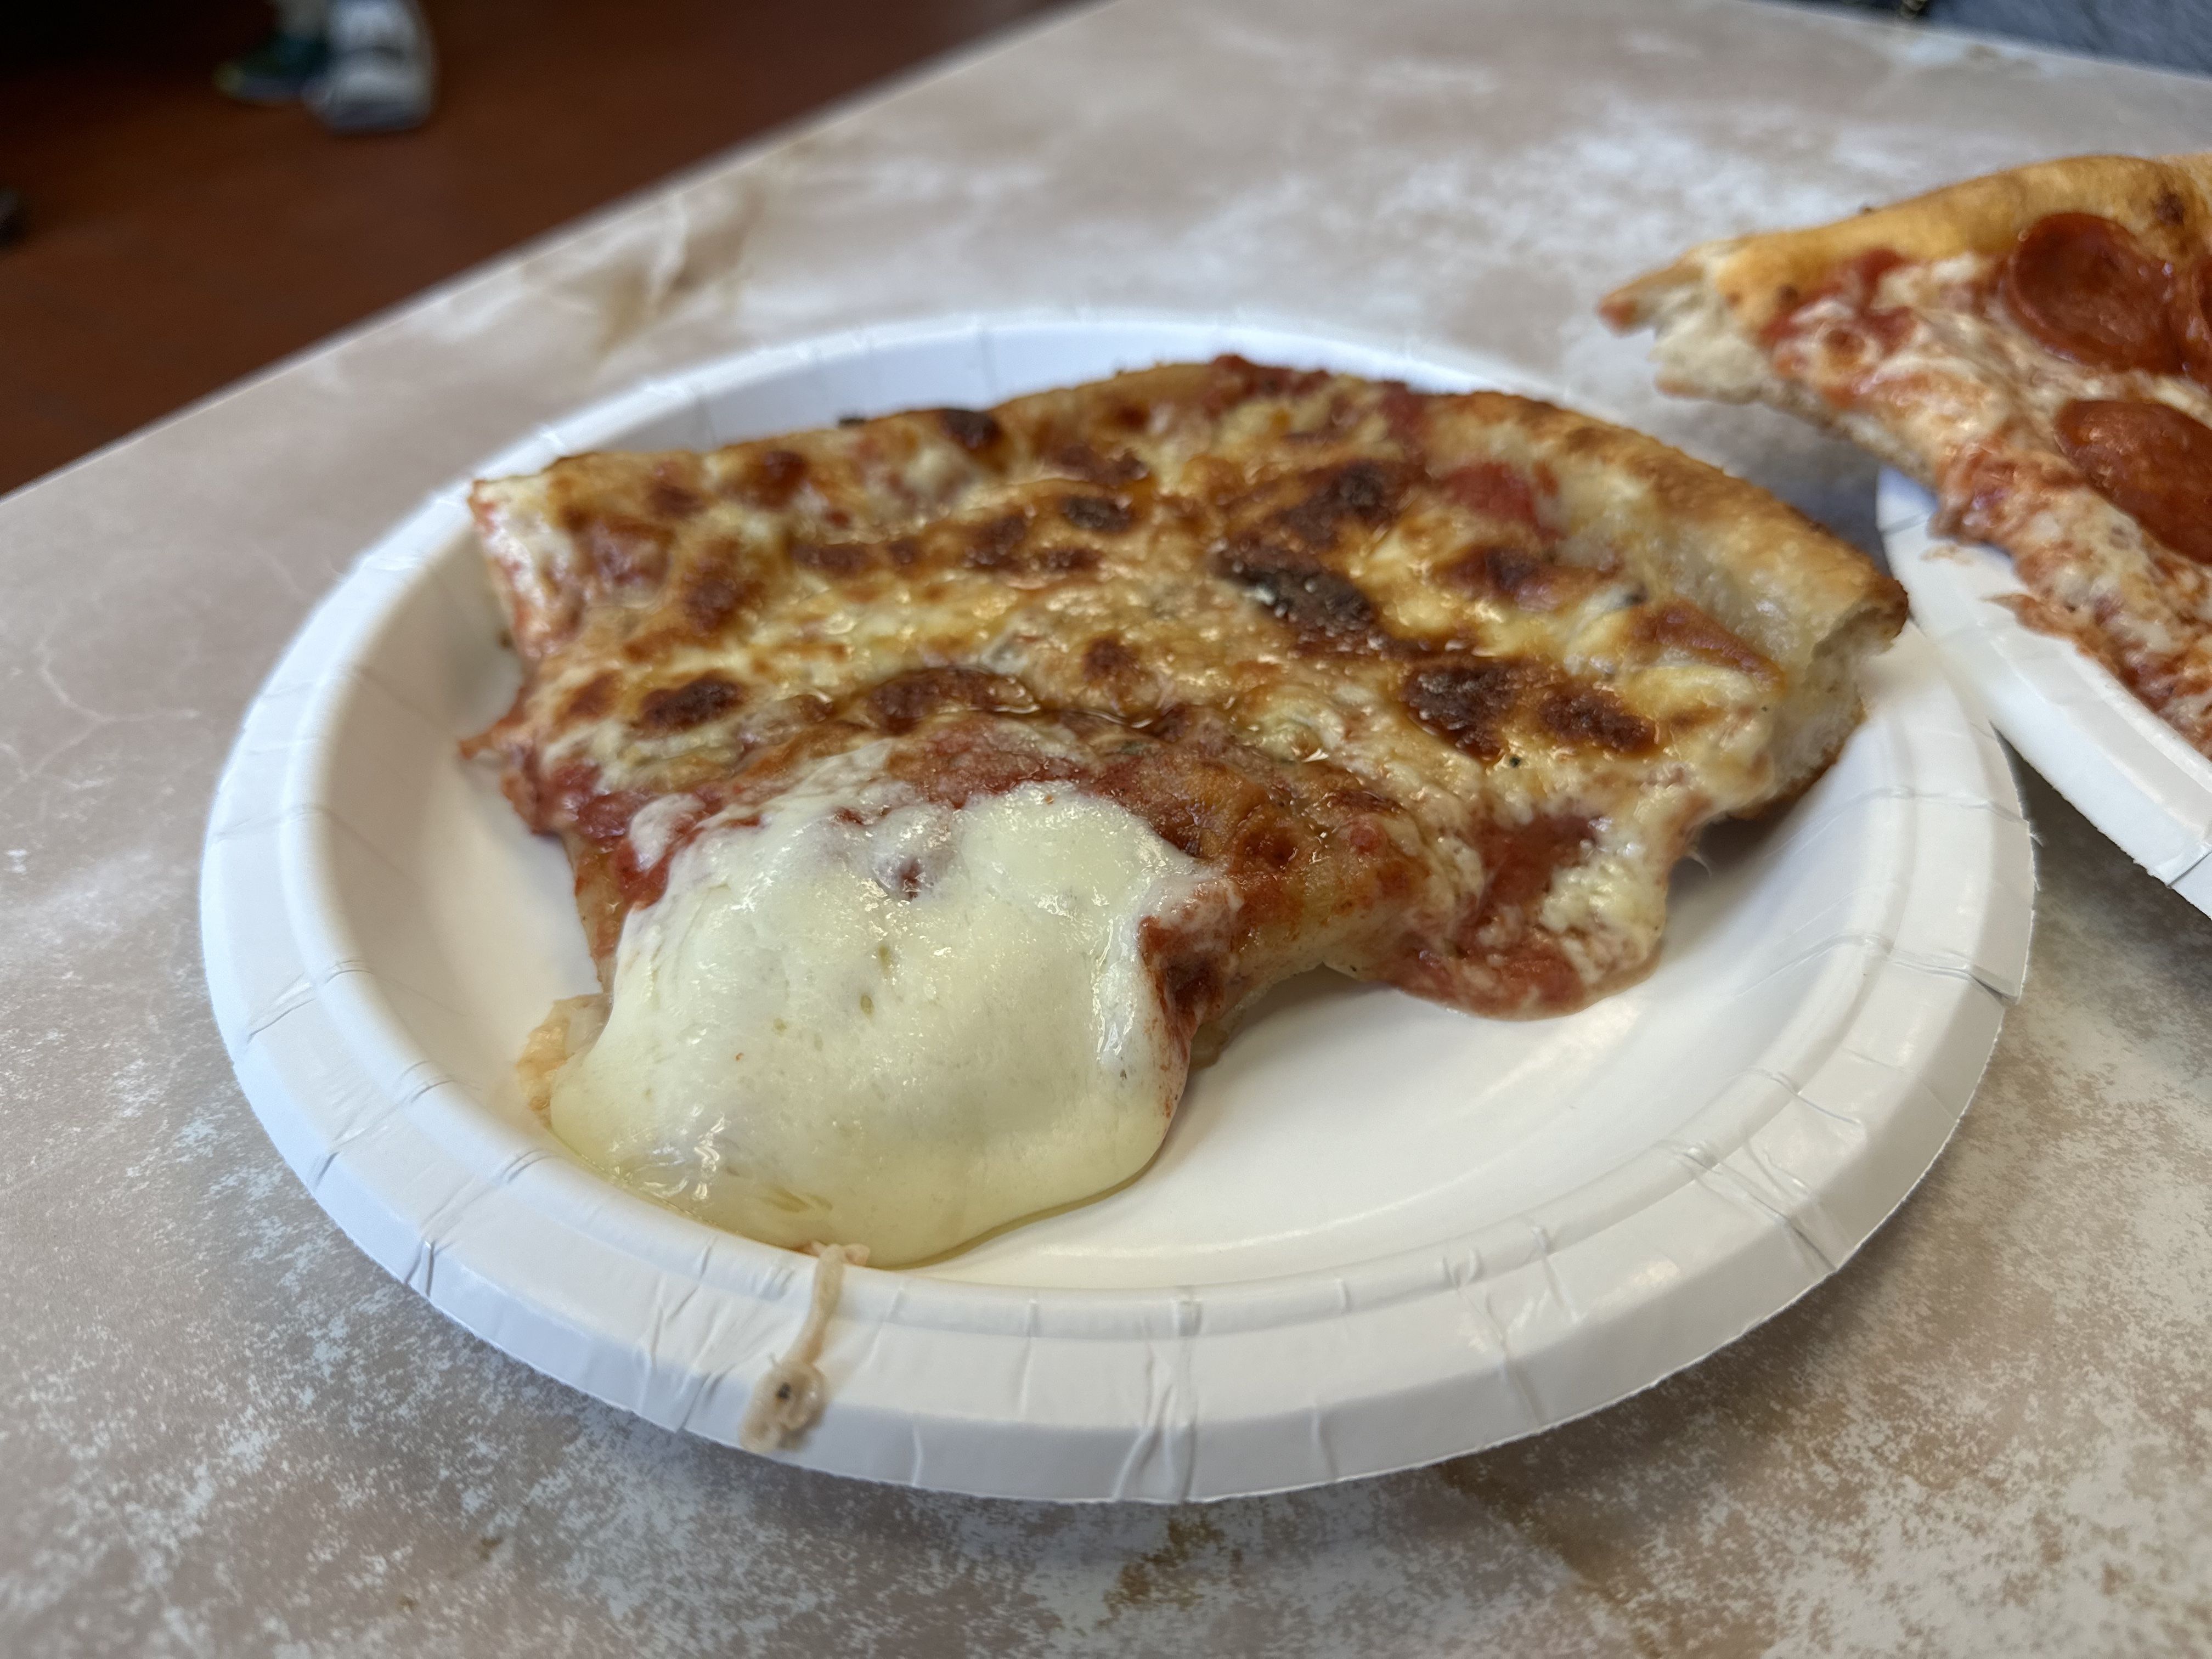 A Sicilian cheese slice that looks like it had an extra glob of mozzarella from Armando's pizza in Cambridge.